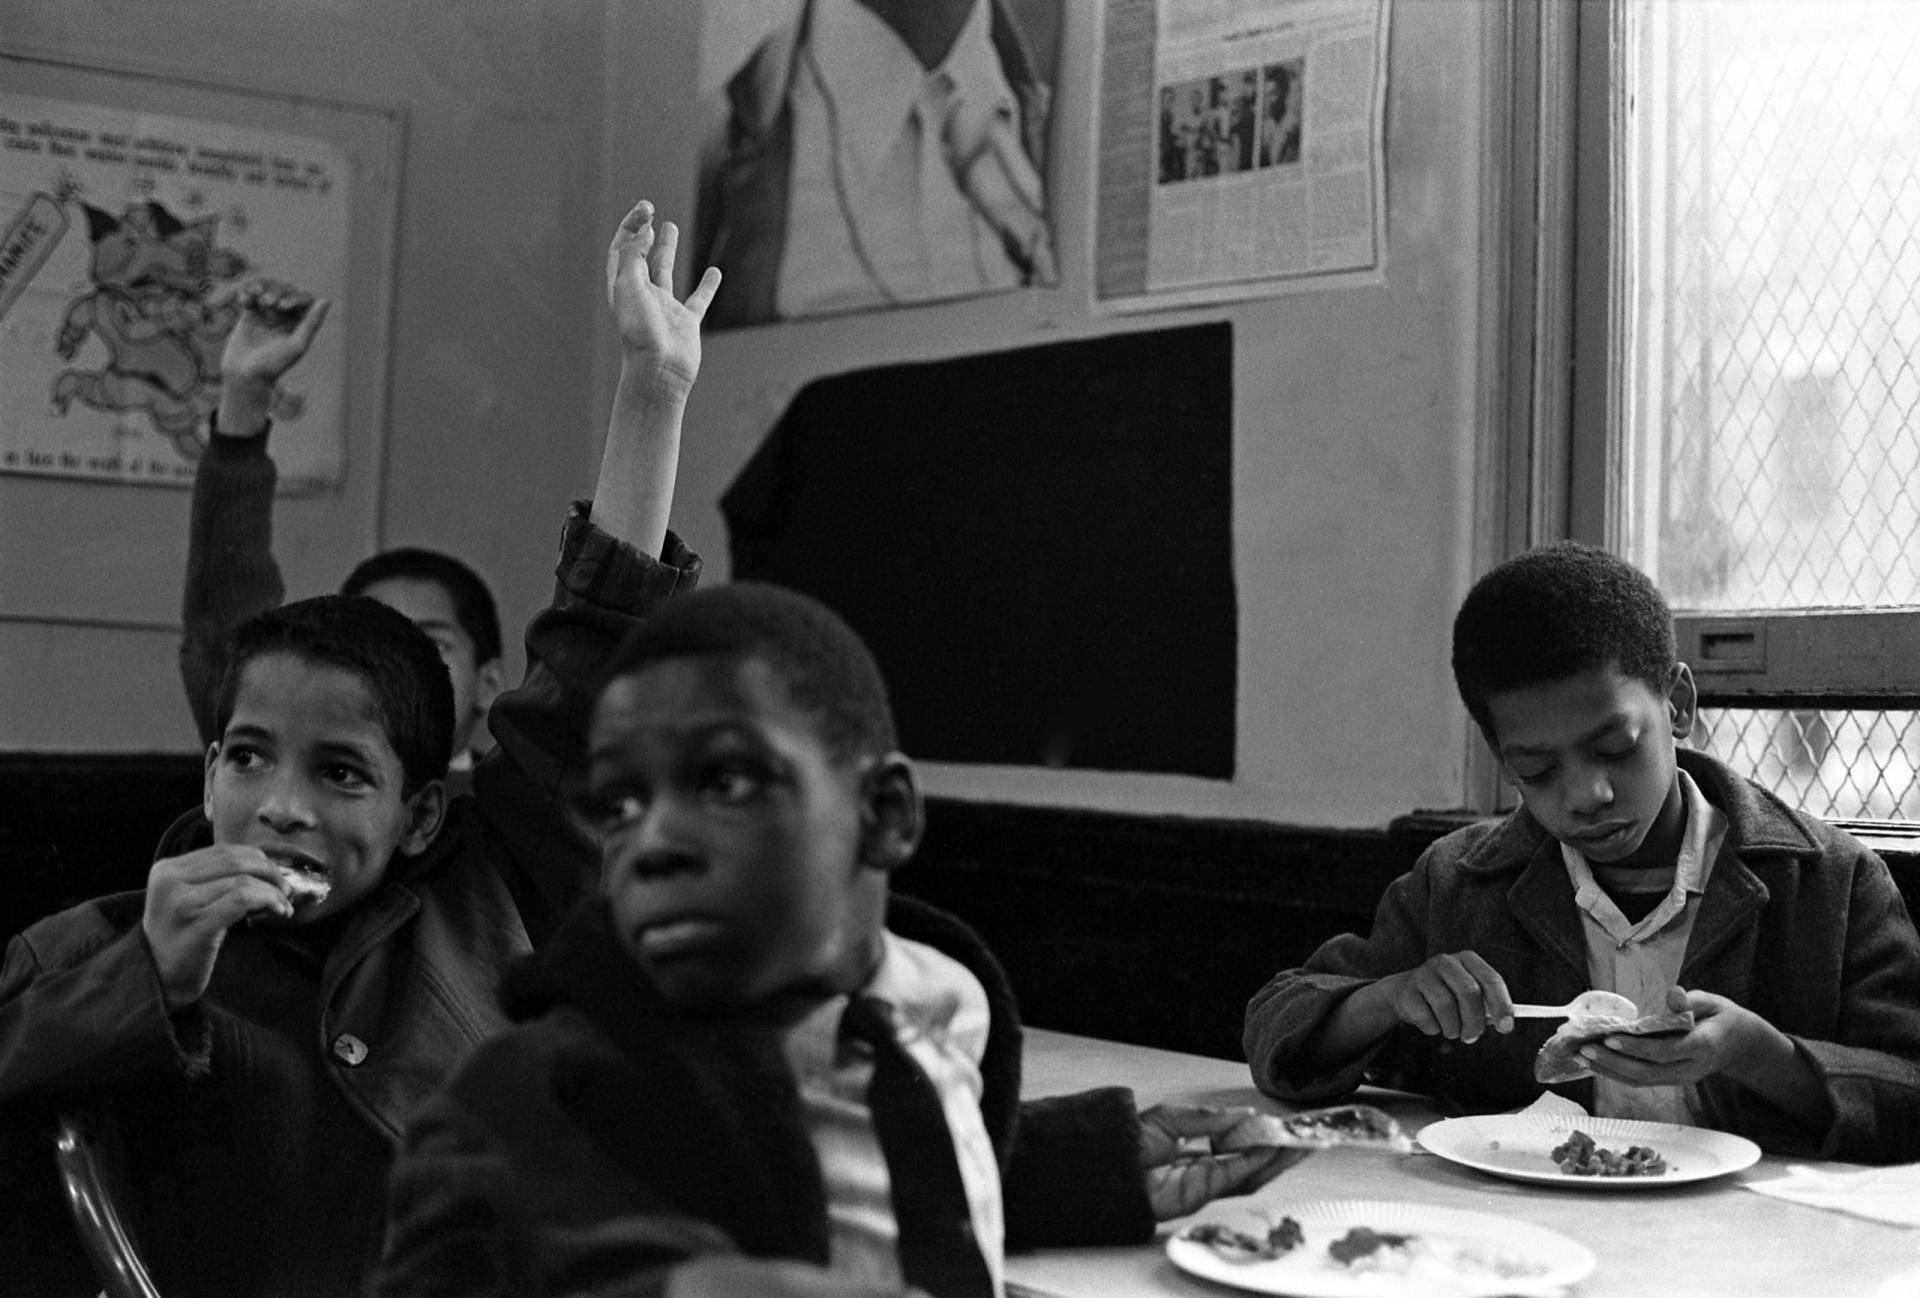 Several young Black boys, one of whom is wearing a suit, raise their hands to speak as they sit around a table, paper plates of food in front of them.